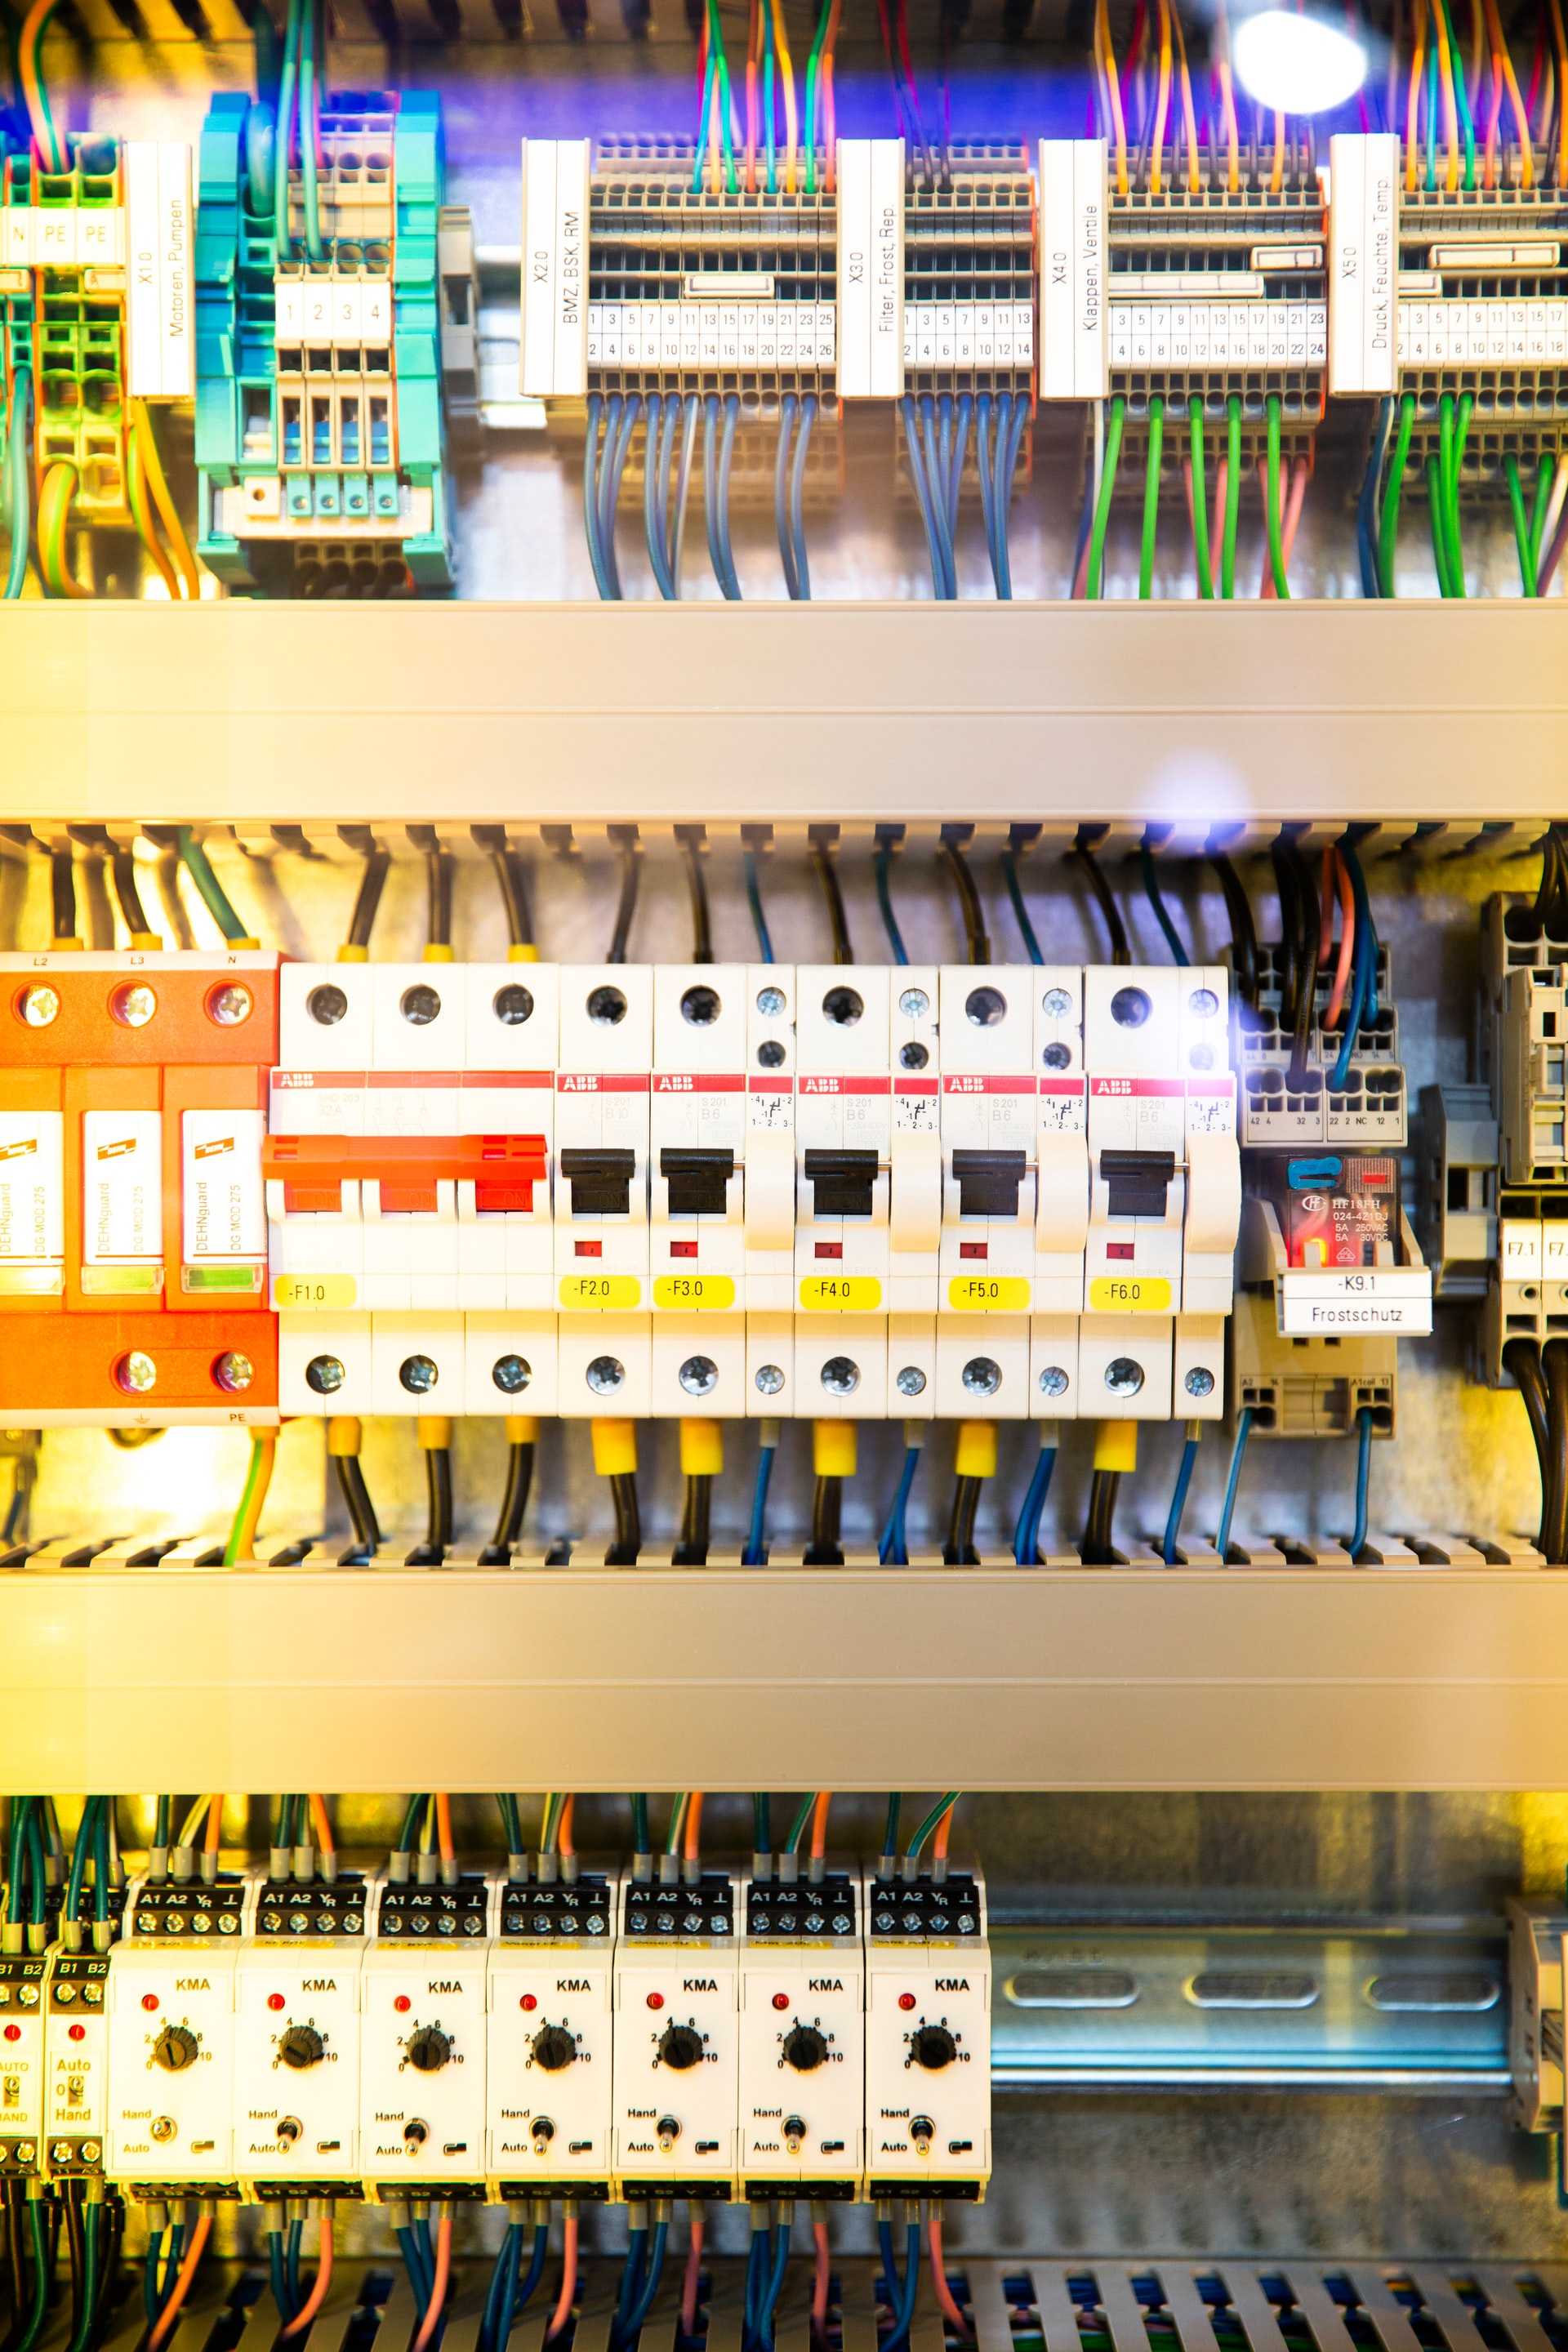 A circuit breaker panel with multi-colored switches and labels.